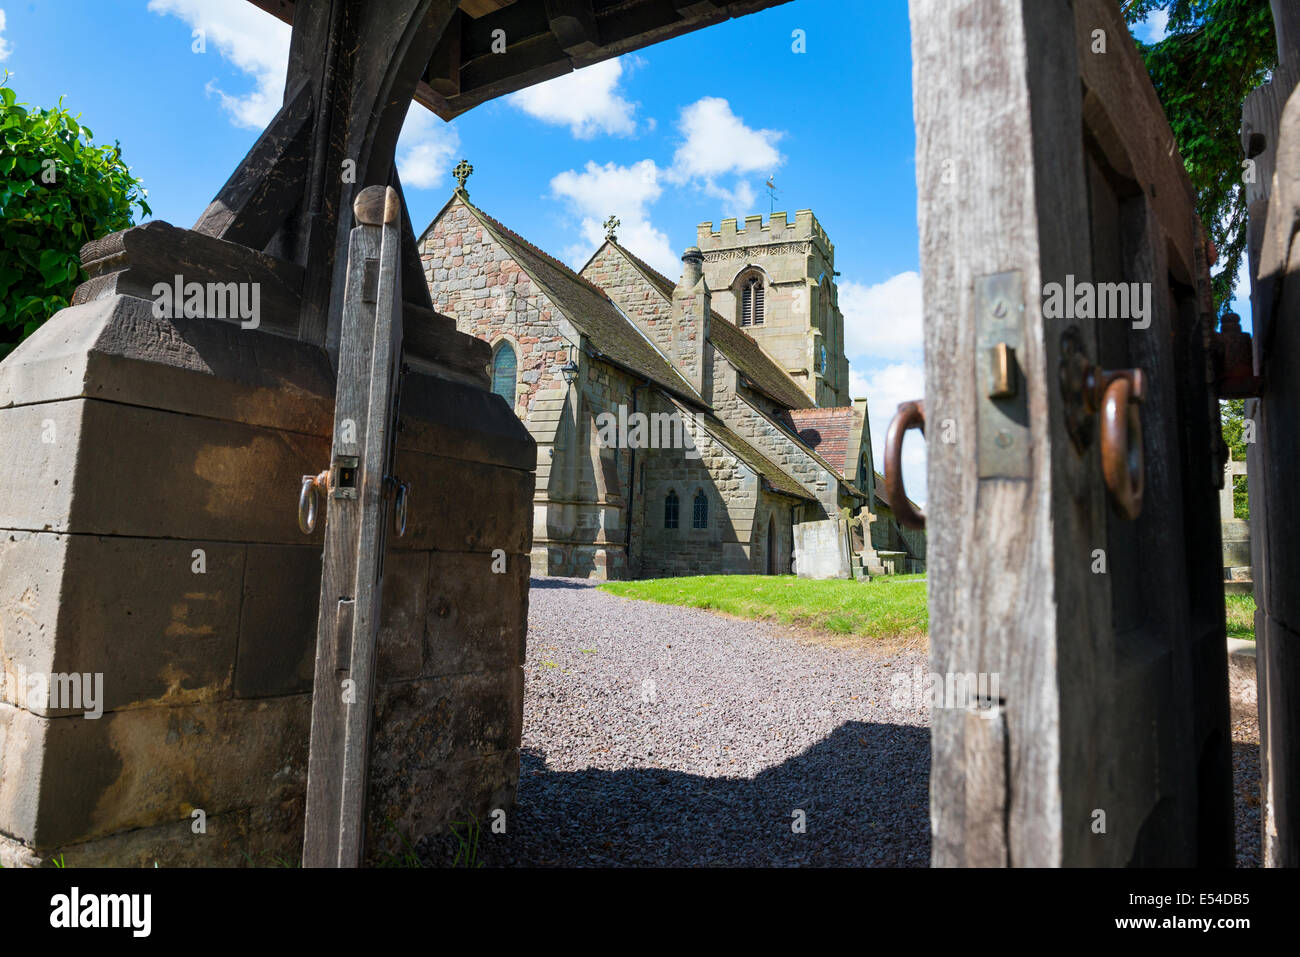 Looking through the lych gate at St Lucia's Church in the village of Upton Magna, Shropshire, England. Stock Photo